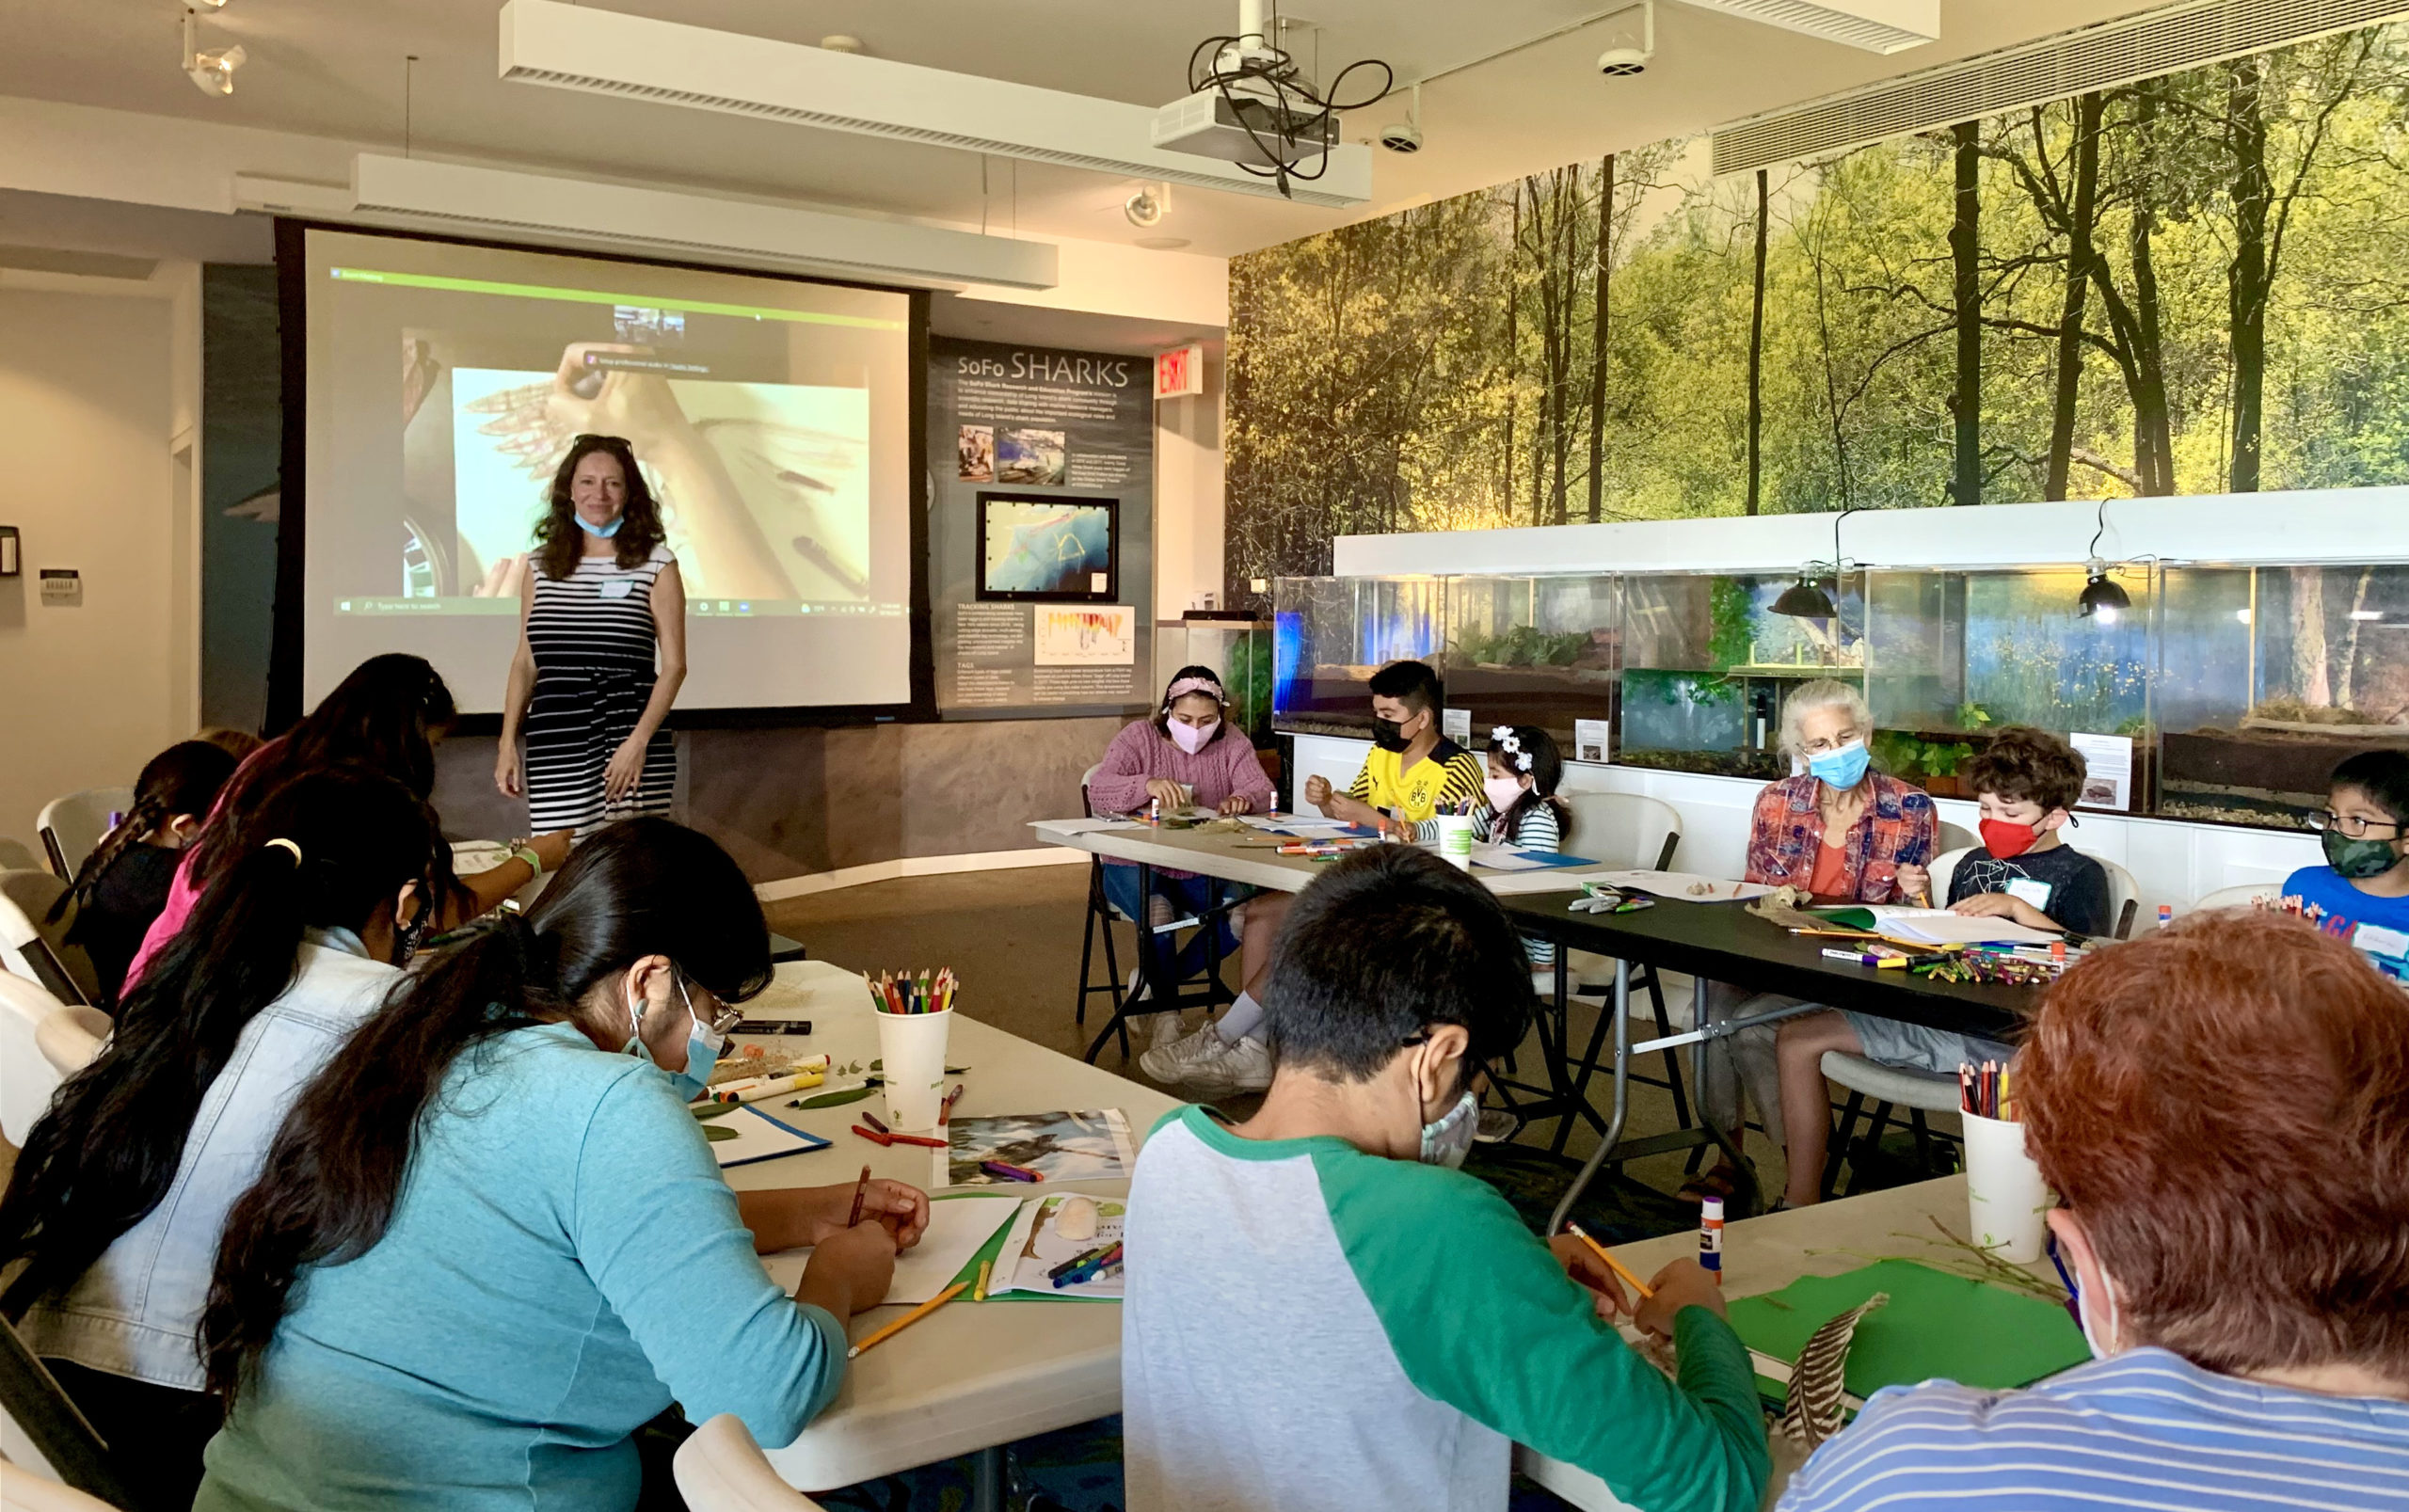 South Fork Natural History Museum (SOFO) hosted a nature storytelling and art workshop inclusive of children from underserved communities. The event was led by a local best-selling author, Ingrid Simunic, with Leah Oppenheimer of the Children’s Museum of the East End.